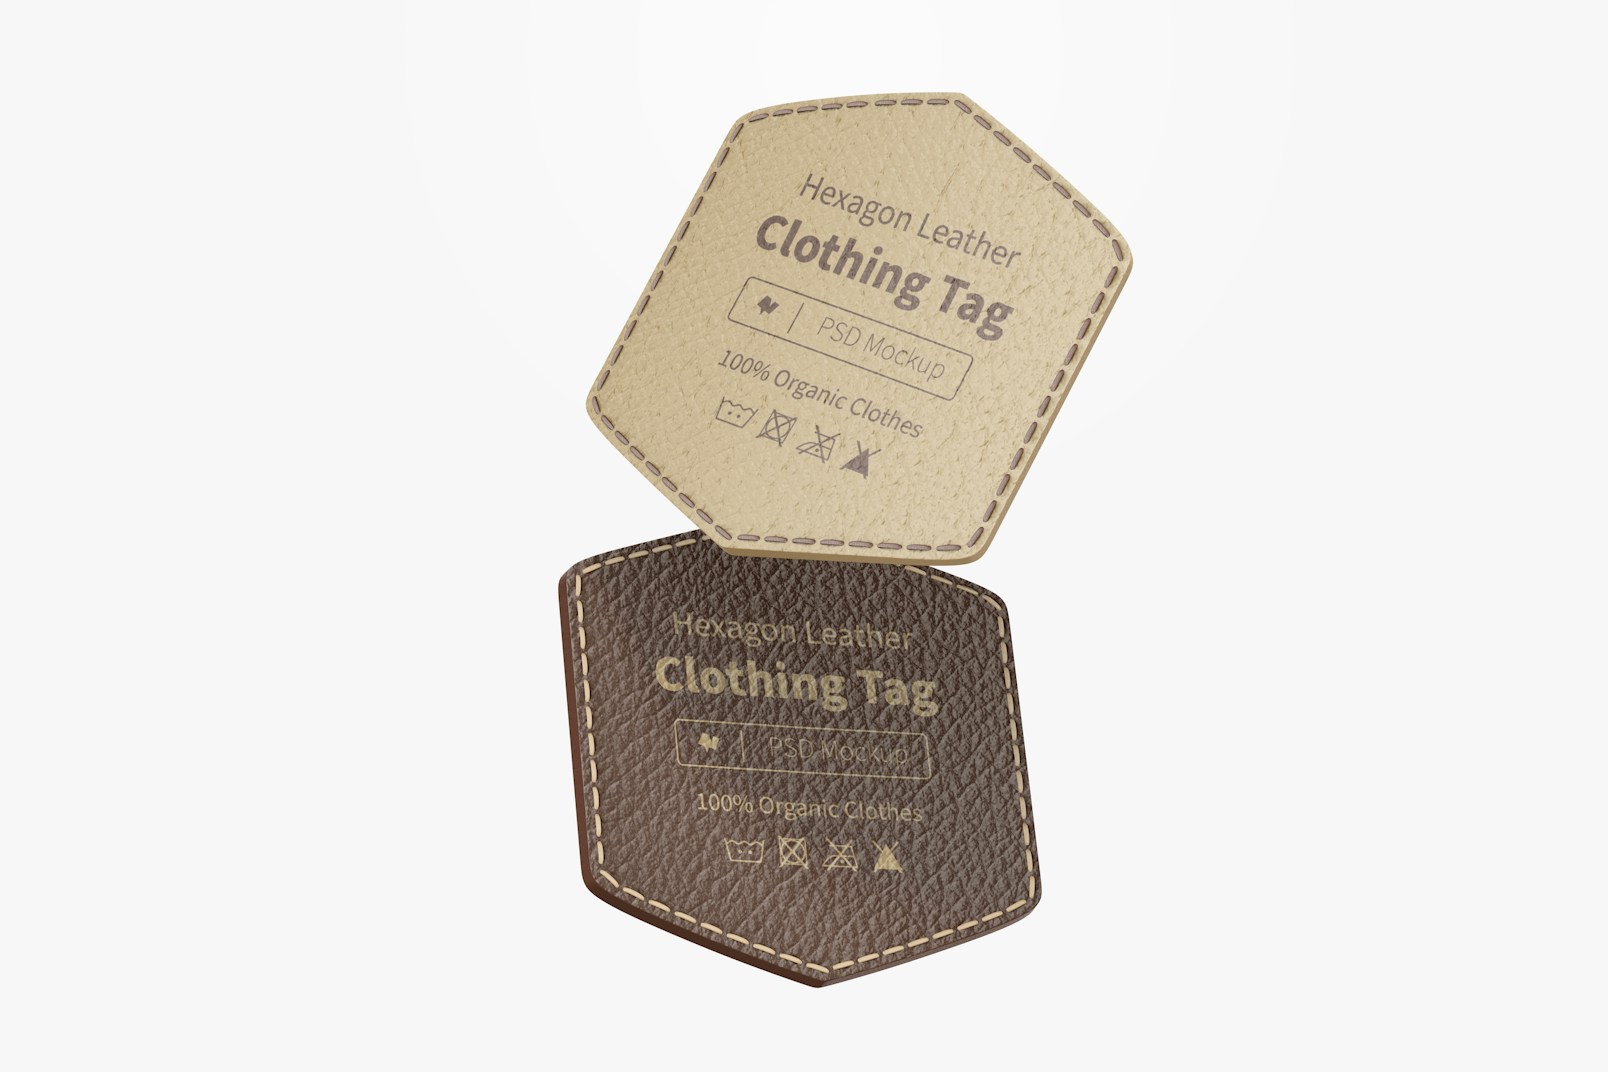 Hexagon Leather Clothing Tags Mockup, Floating